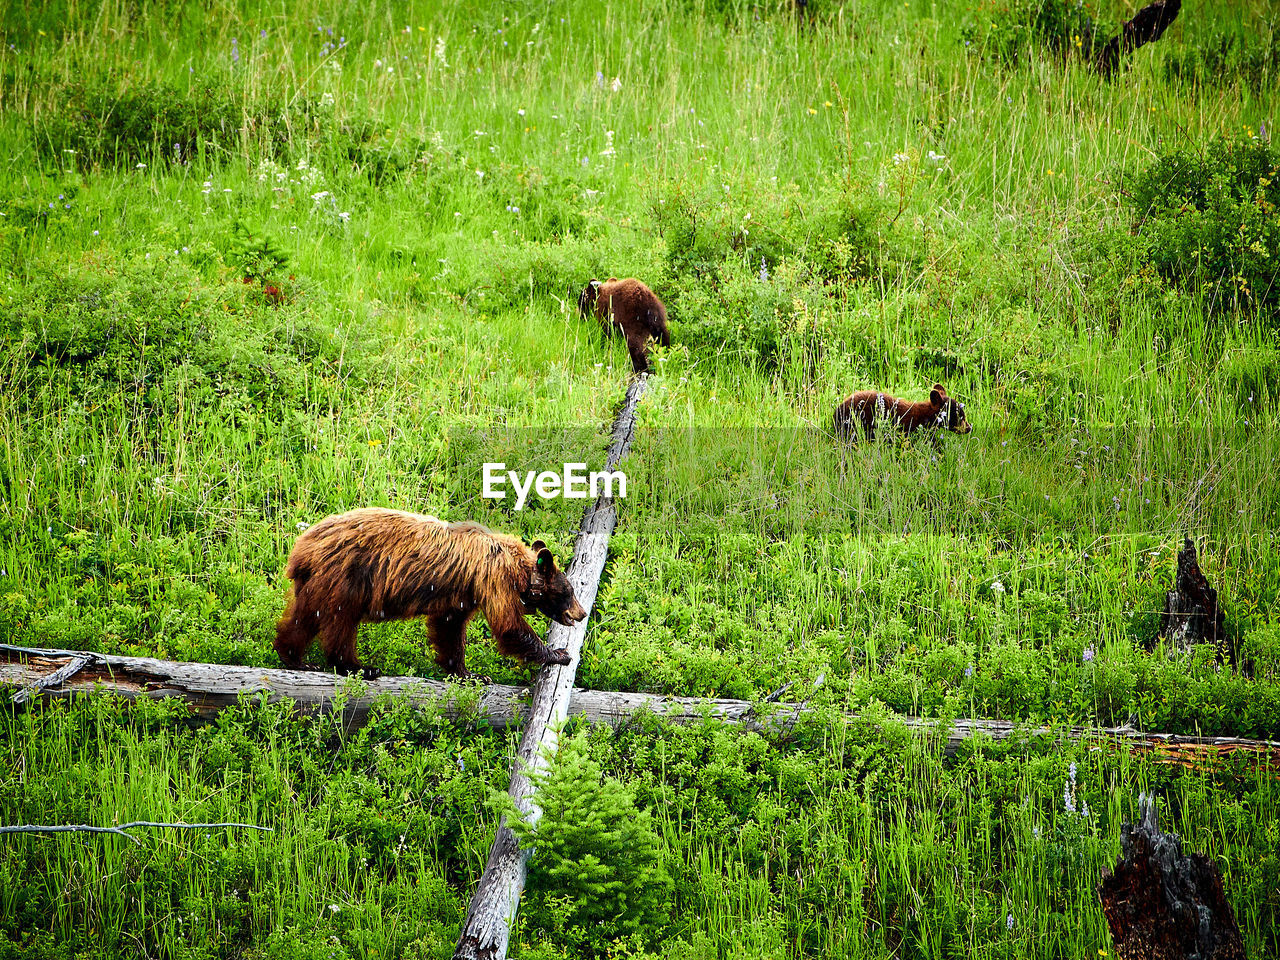 Female bear with cubs foraging of food at yellowstone national park.